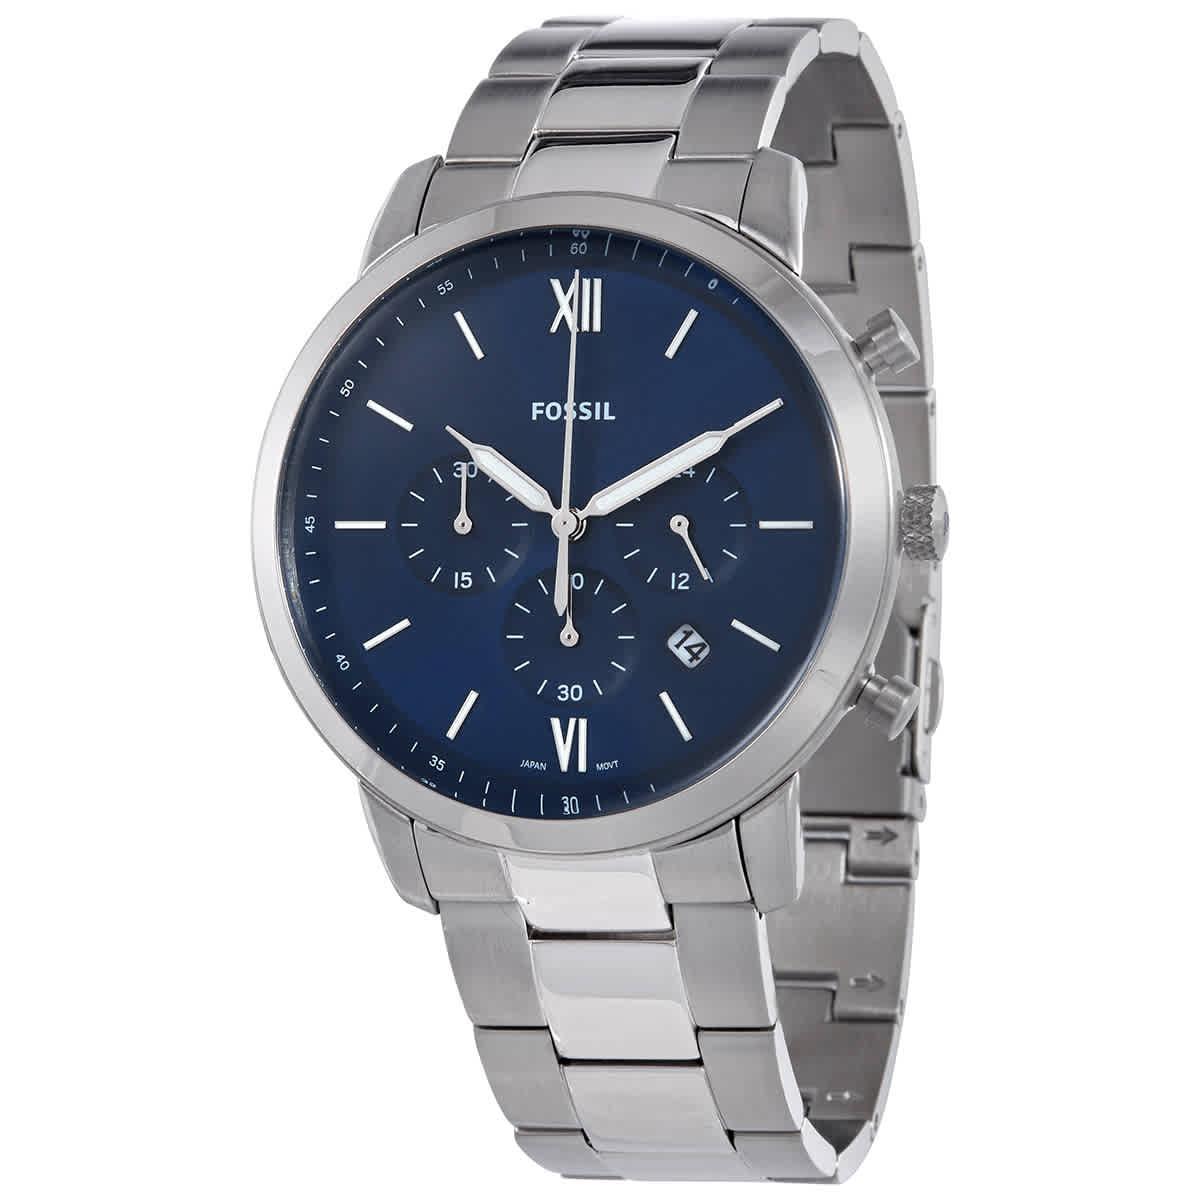 Fossil Leather Neutra Chronograph Stainless Steel Watch Case C221046 in Silver Metallic Mens Accessories Watches for Men 